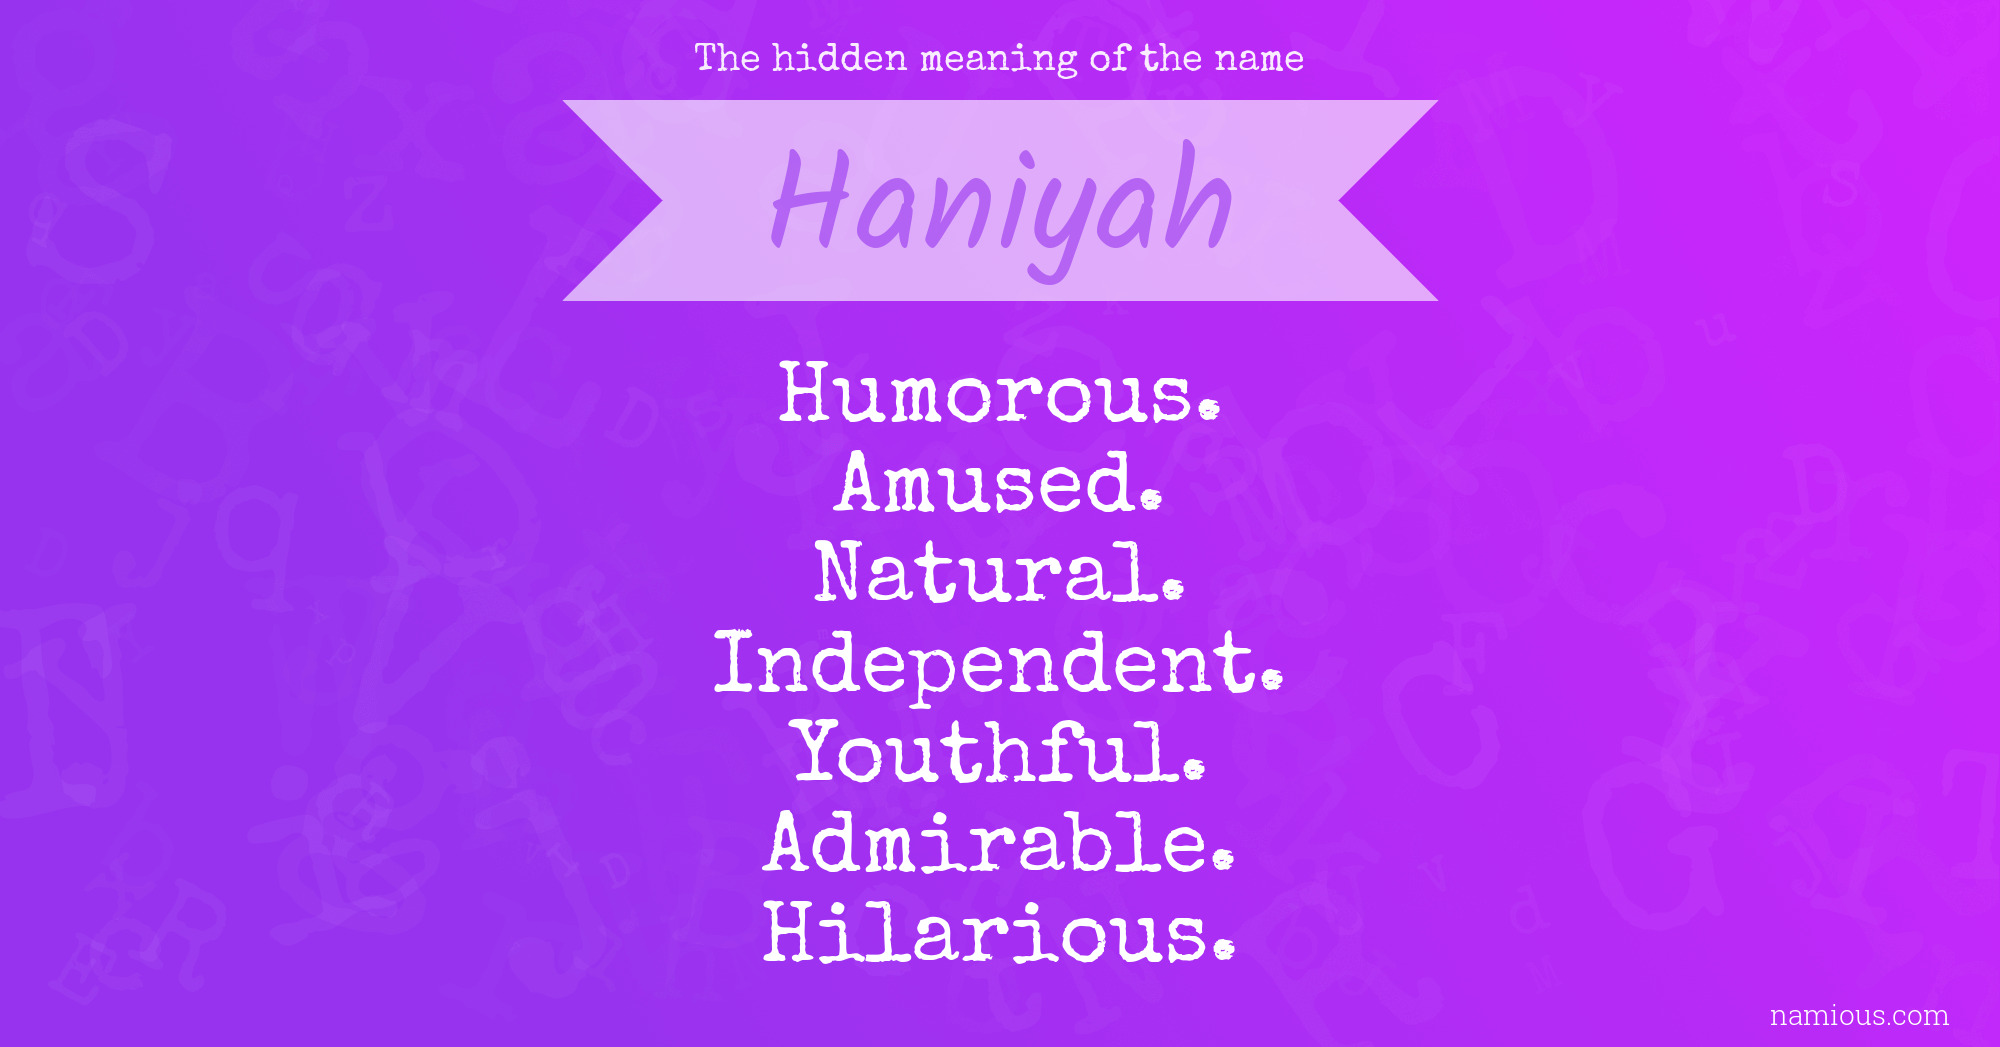 The hidden meaning of the name Haniyah